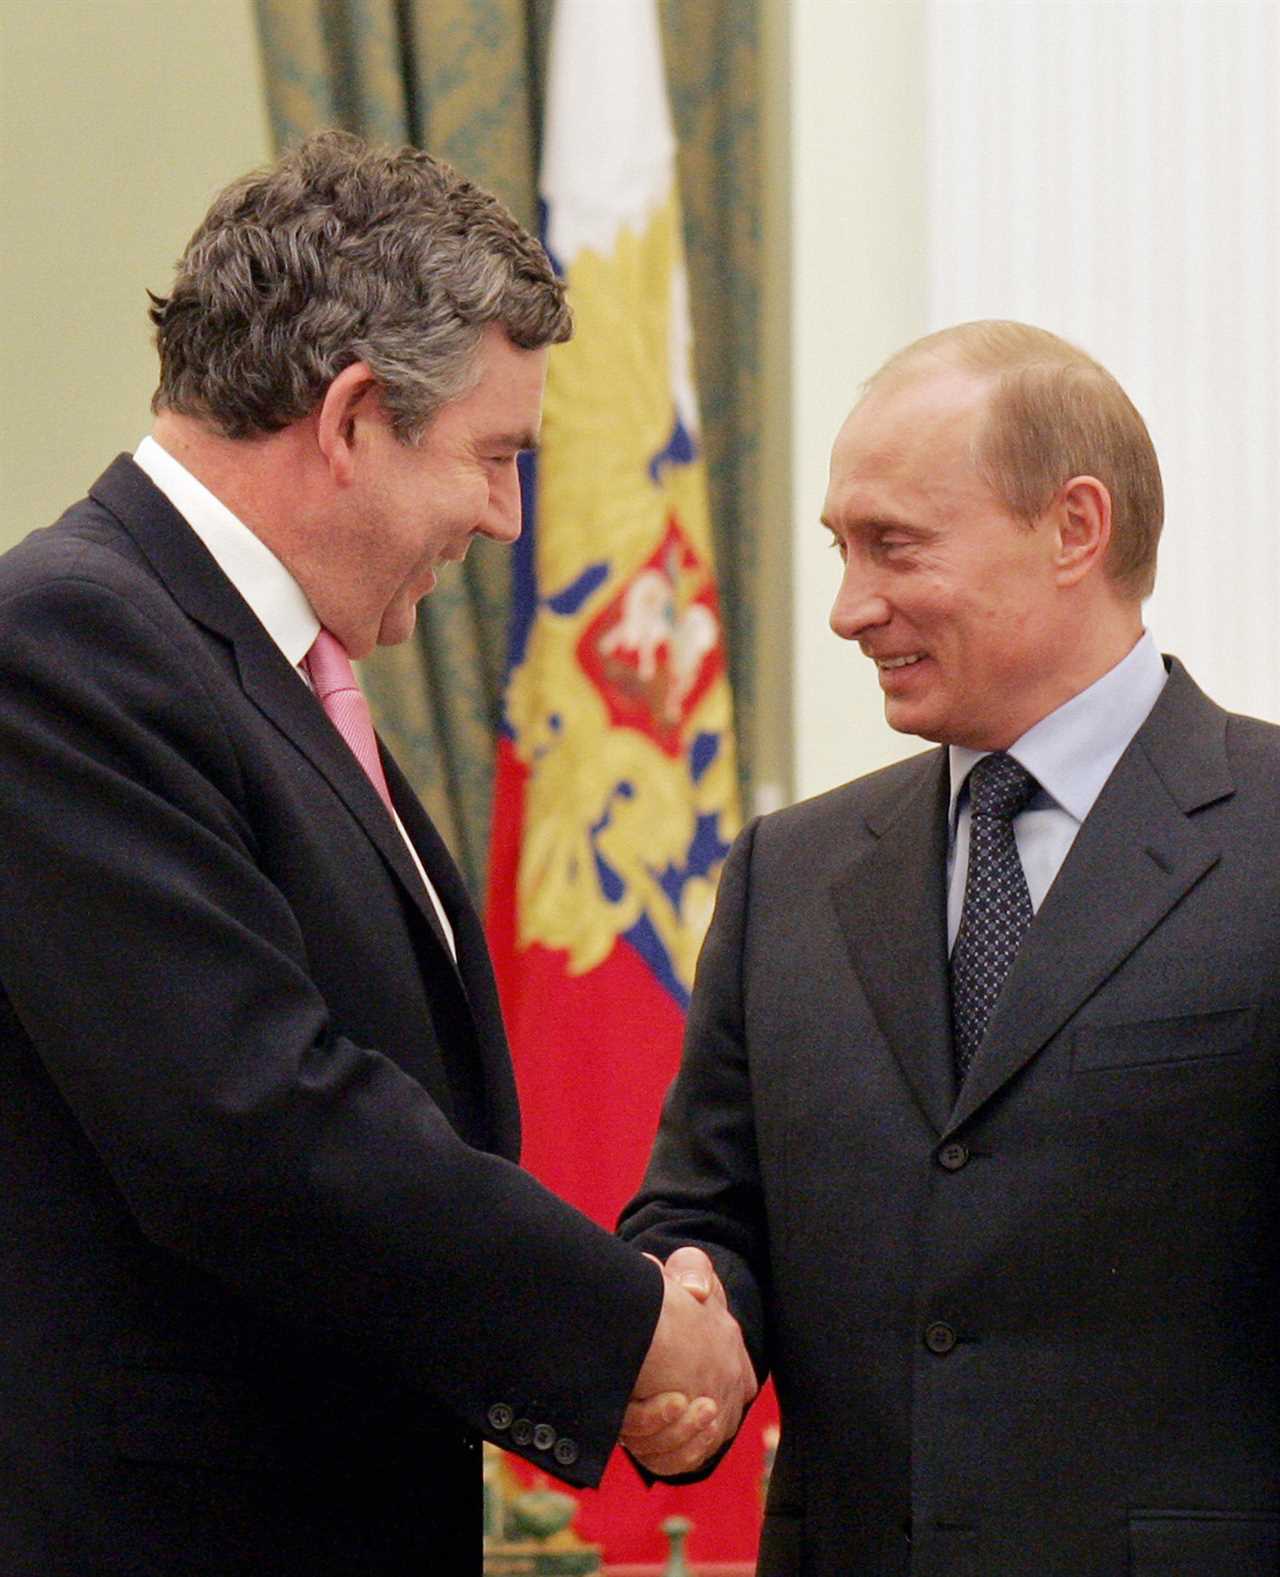 Vladimir Putin mocked me and made me sit on small chair, reveals ex-PM Gordon Brown